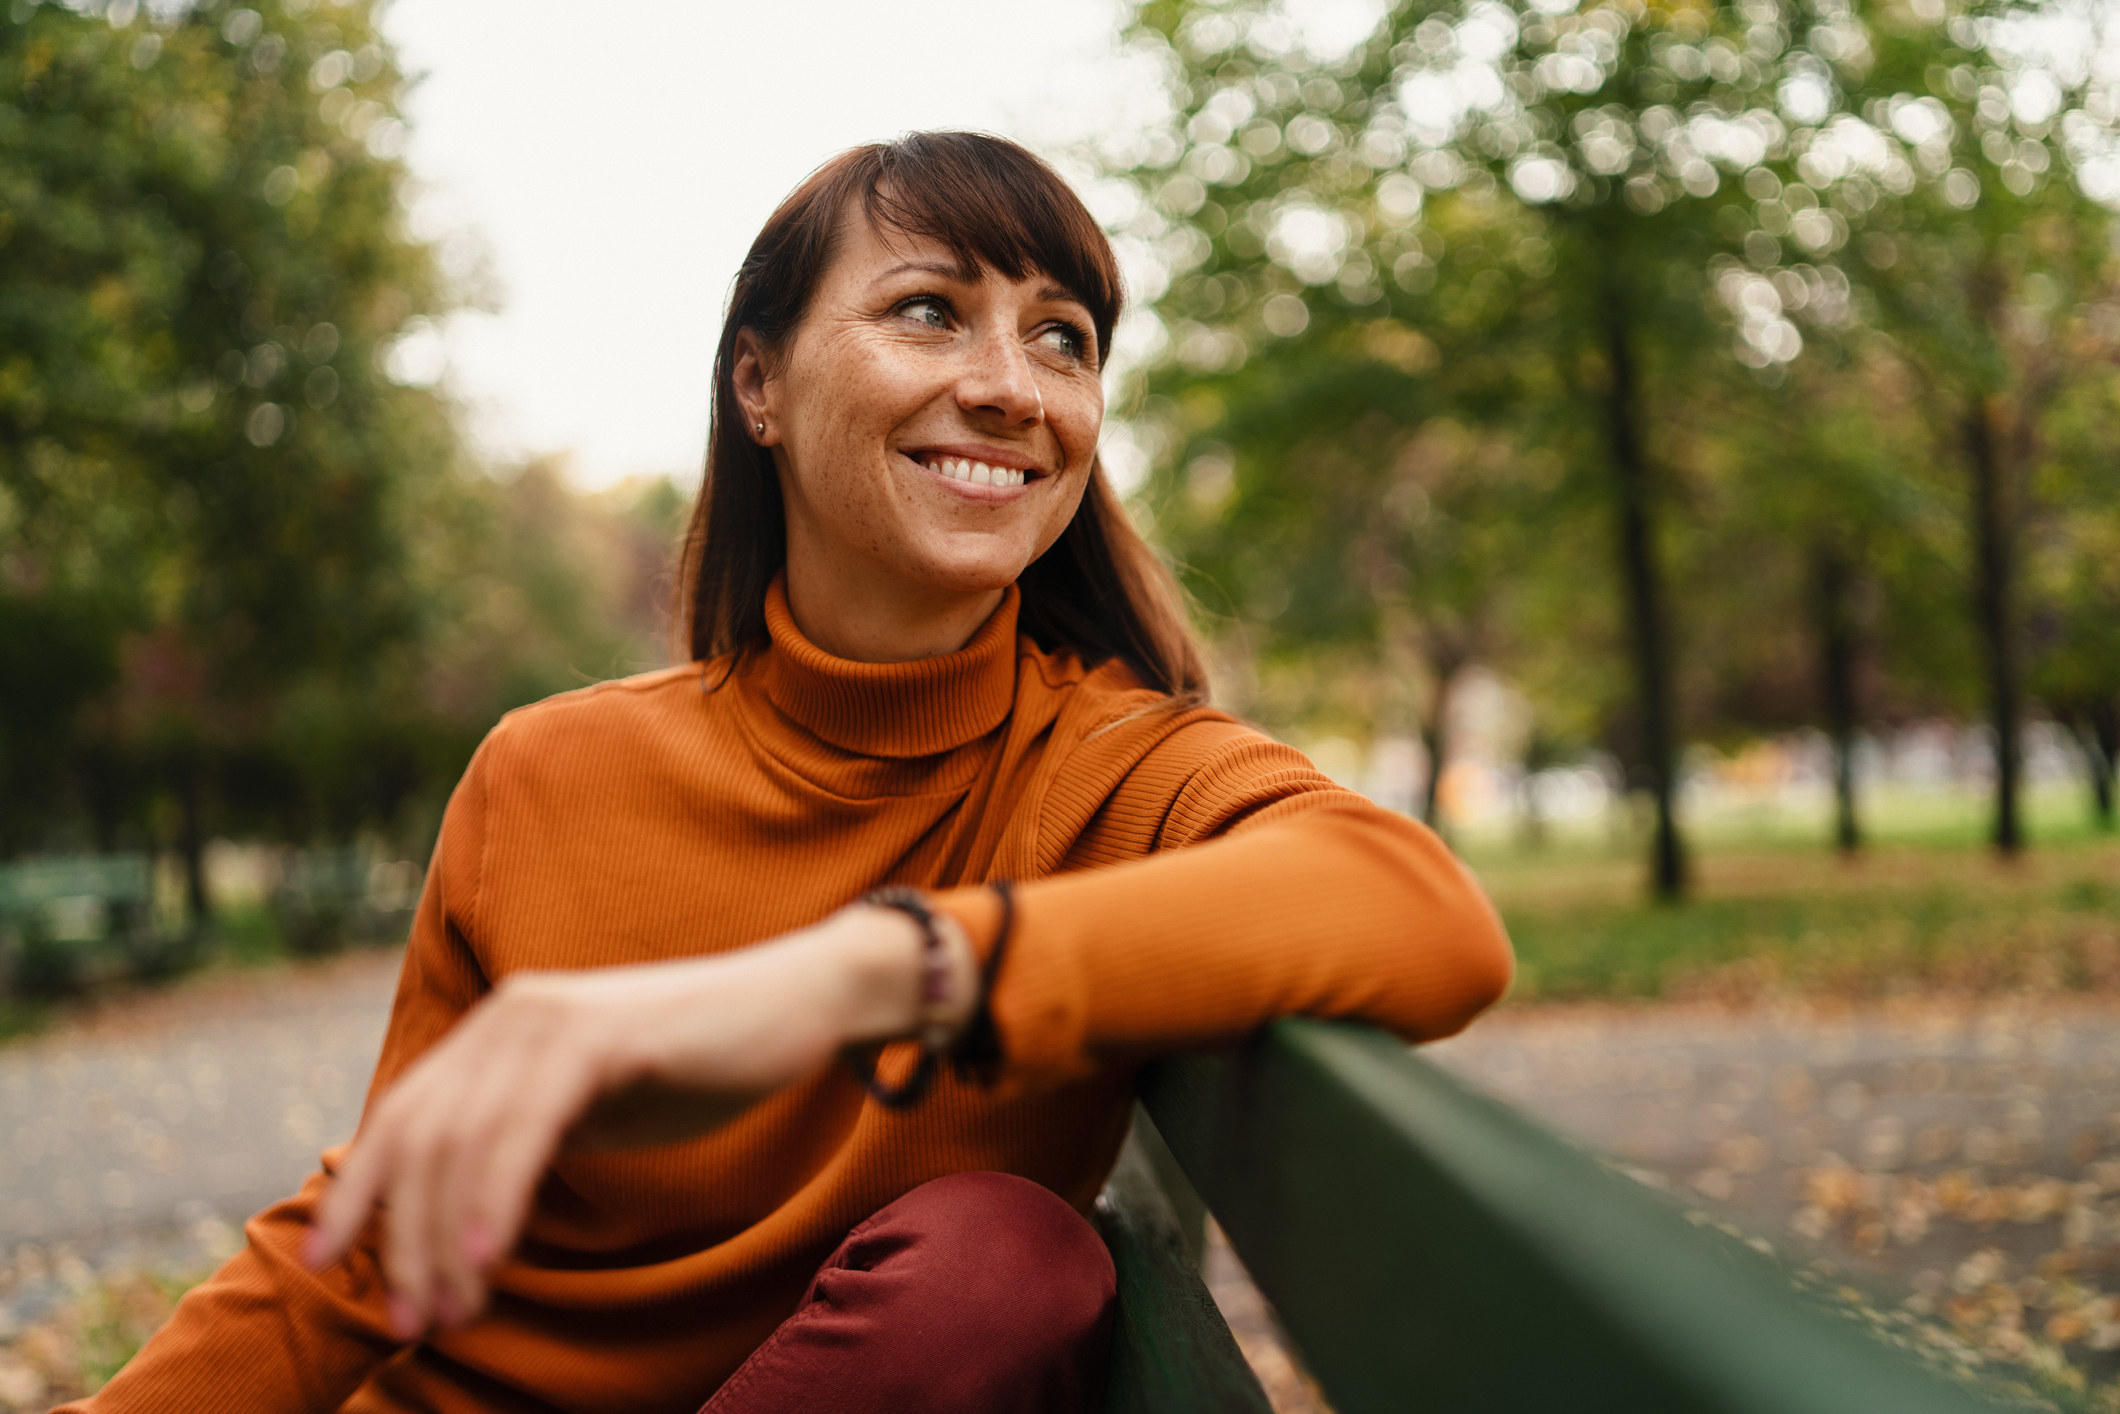 woman smiling on a bench